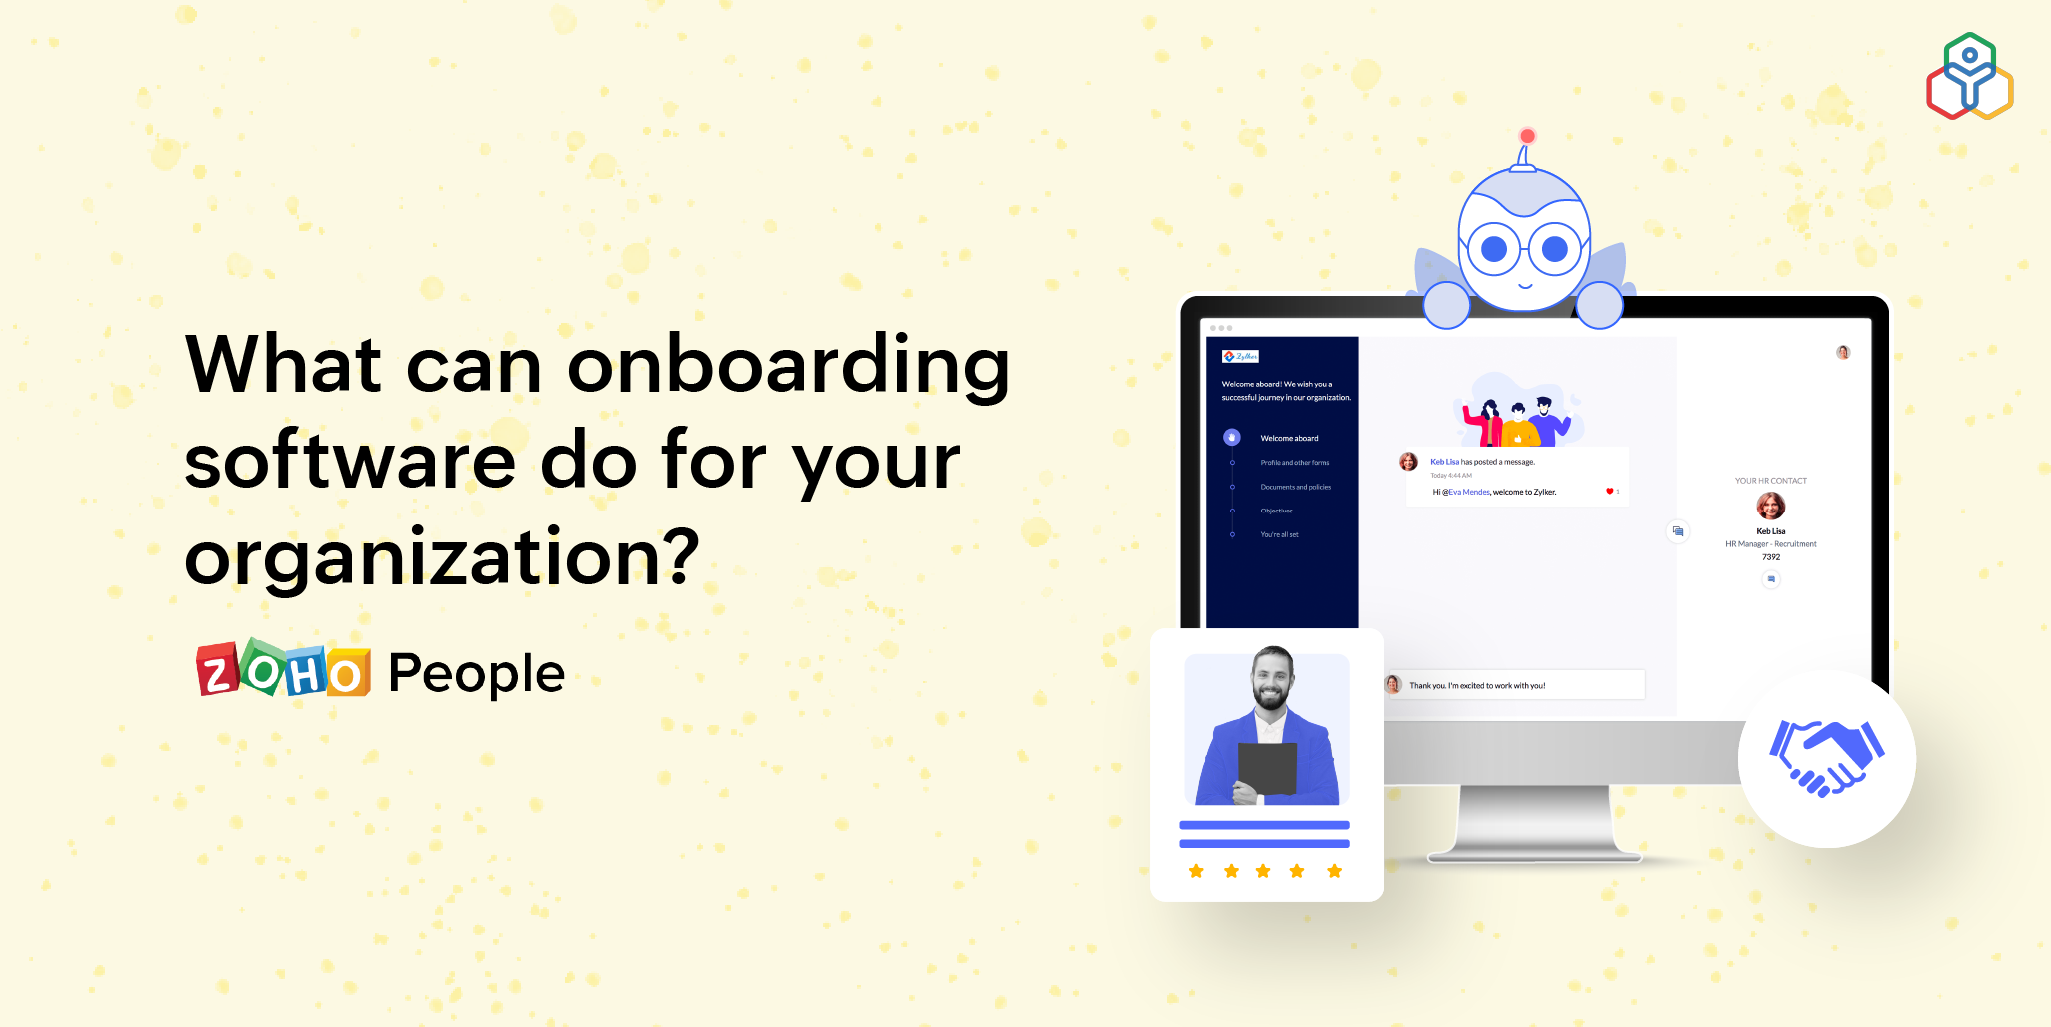 Here’s how onboarding software can help your organization